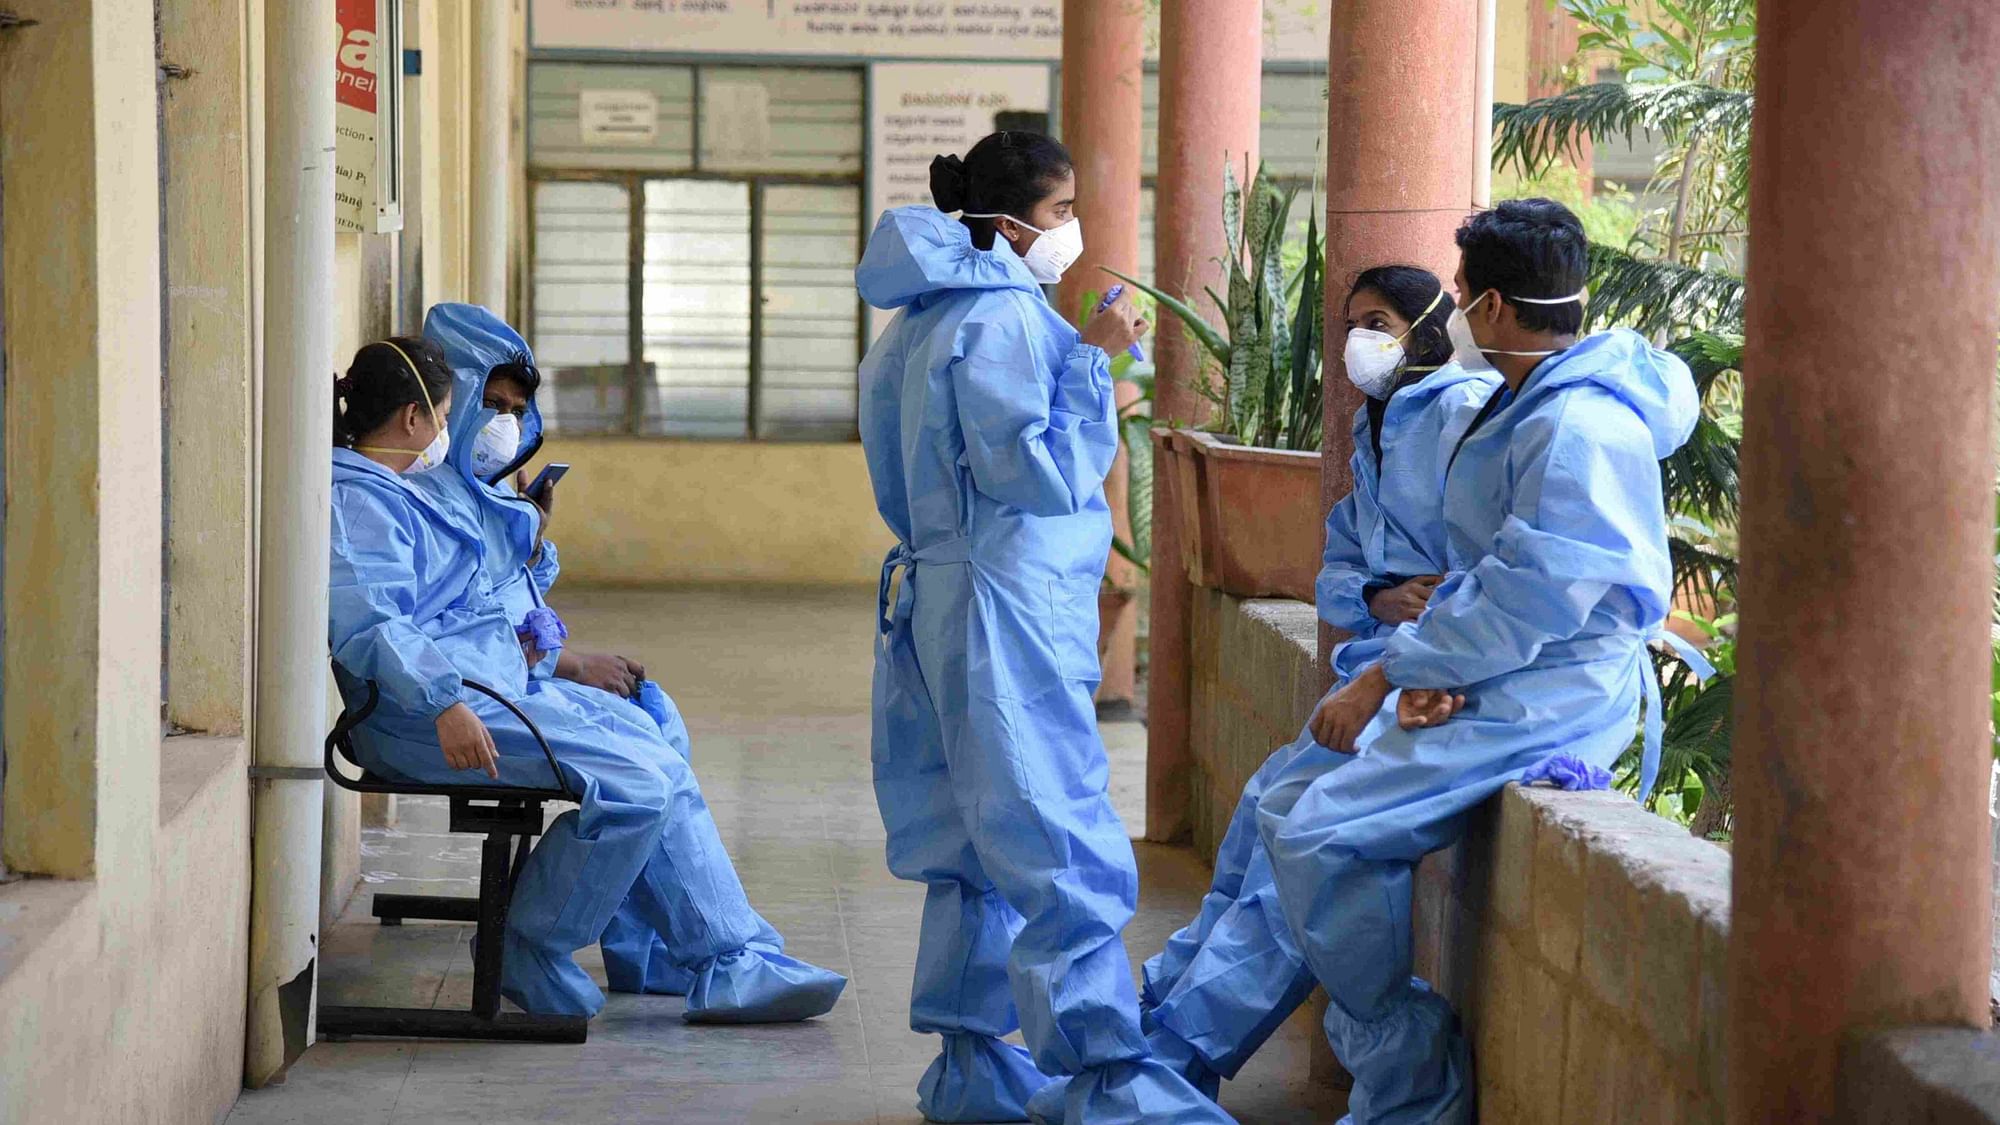 Coronavirus News Live Updates: Medics wearing protective suits are seen at a hospital in Bengaluru on 1 May.